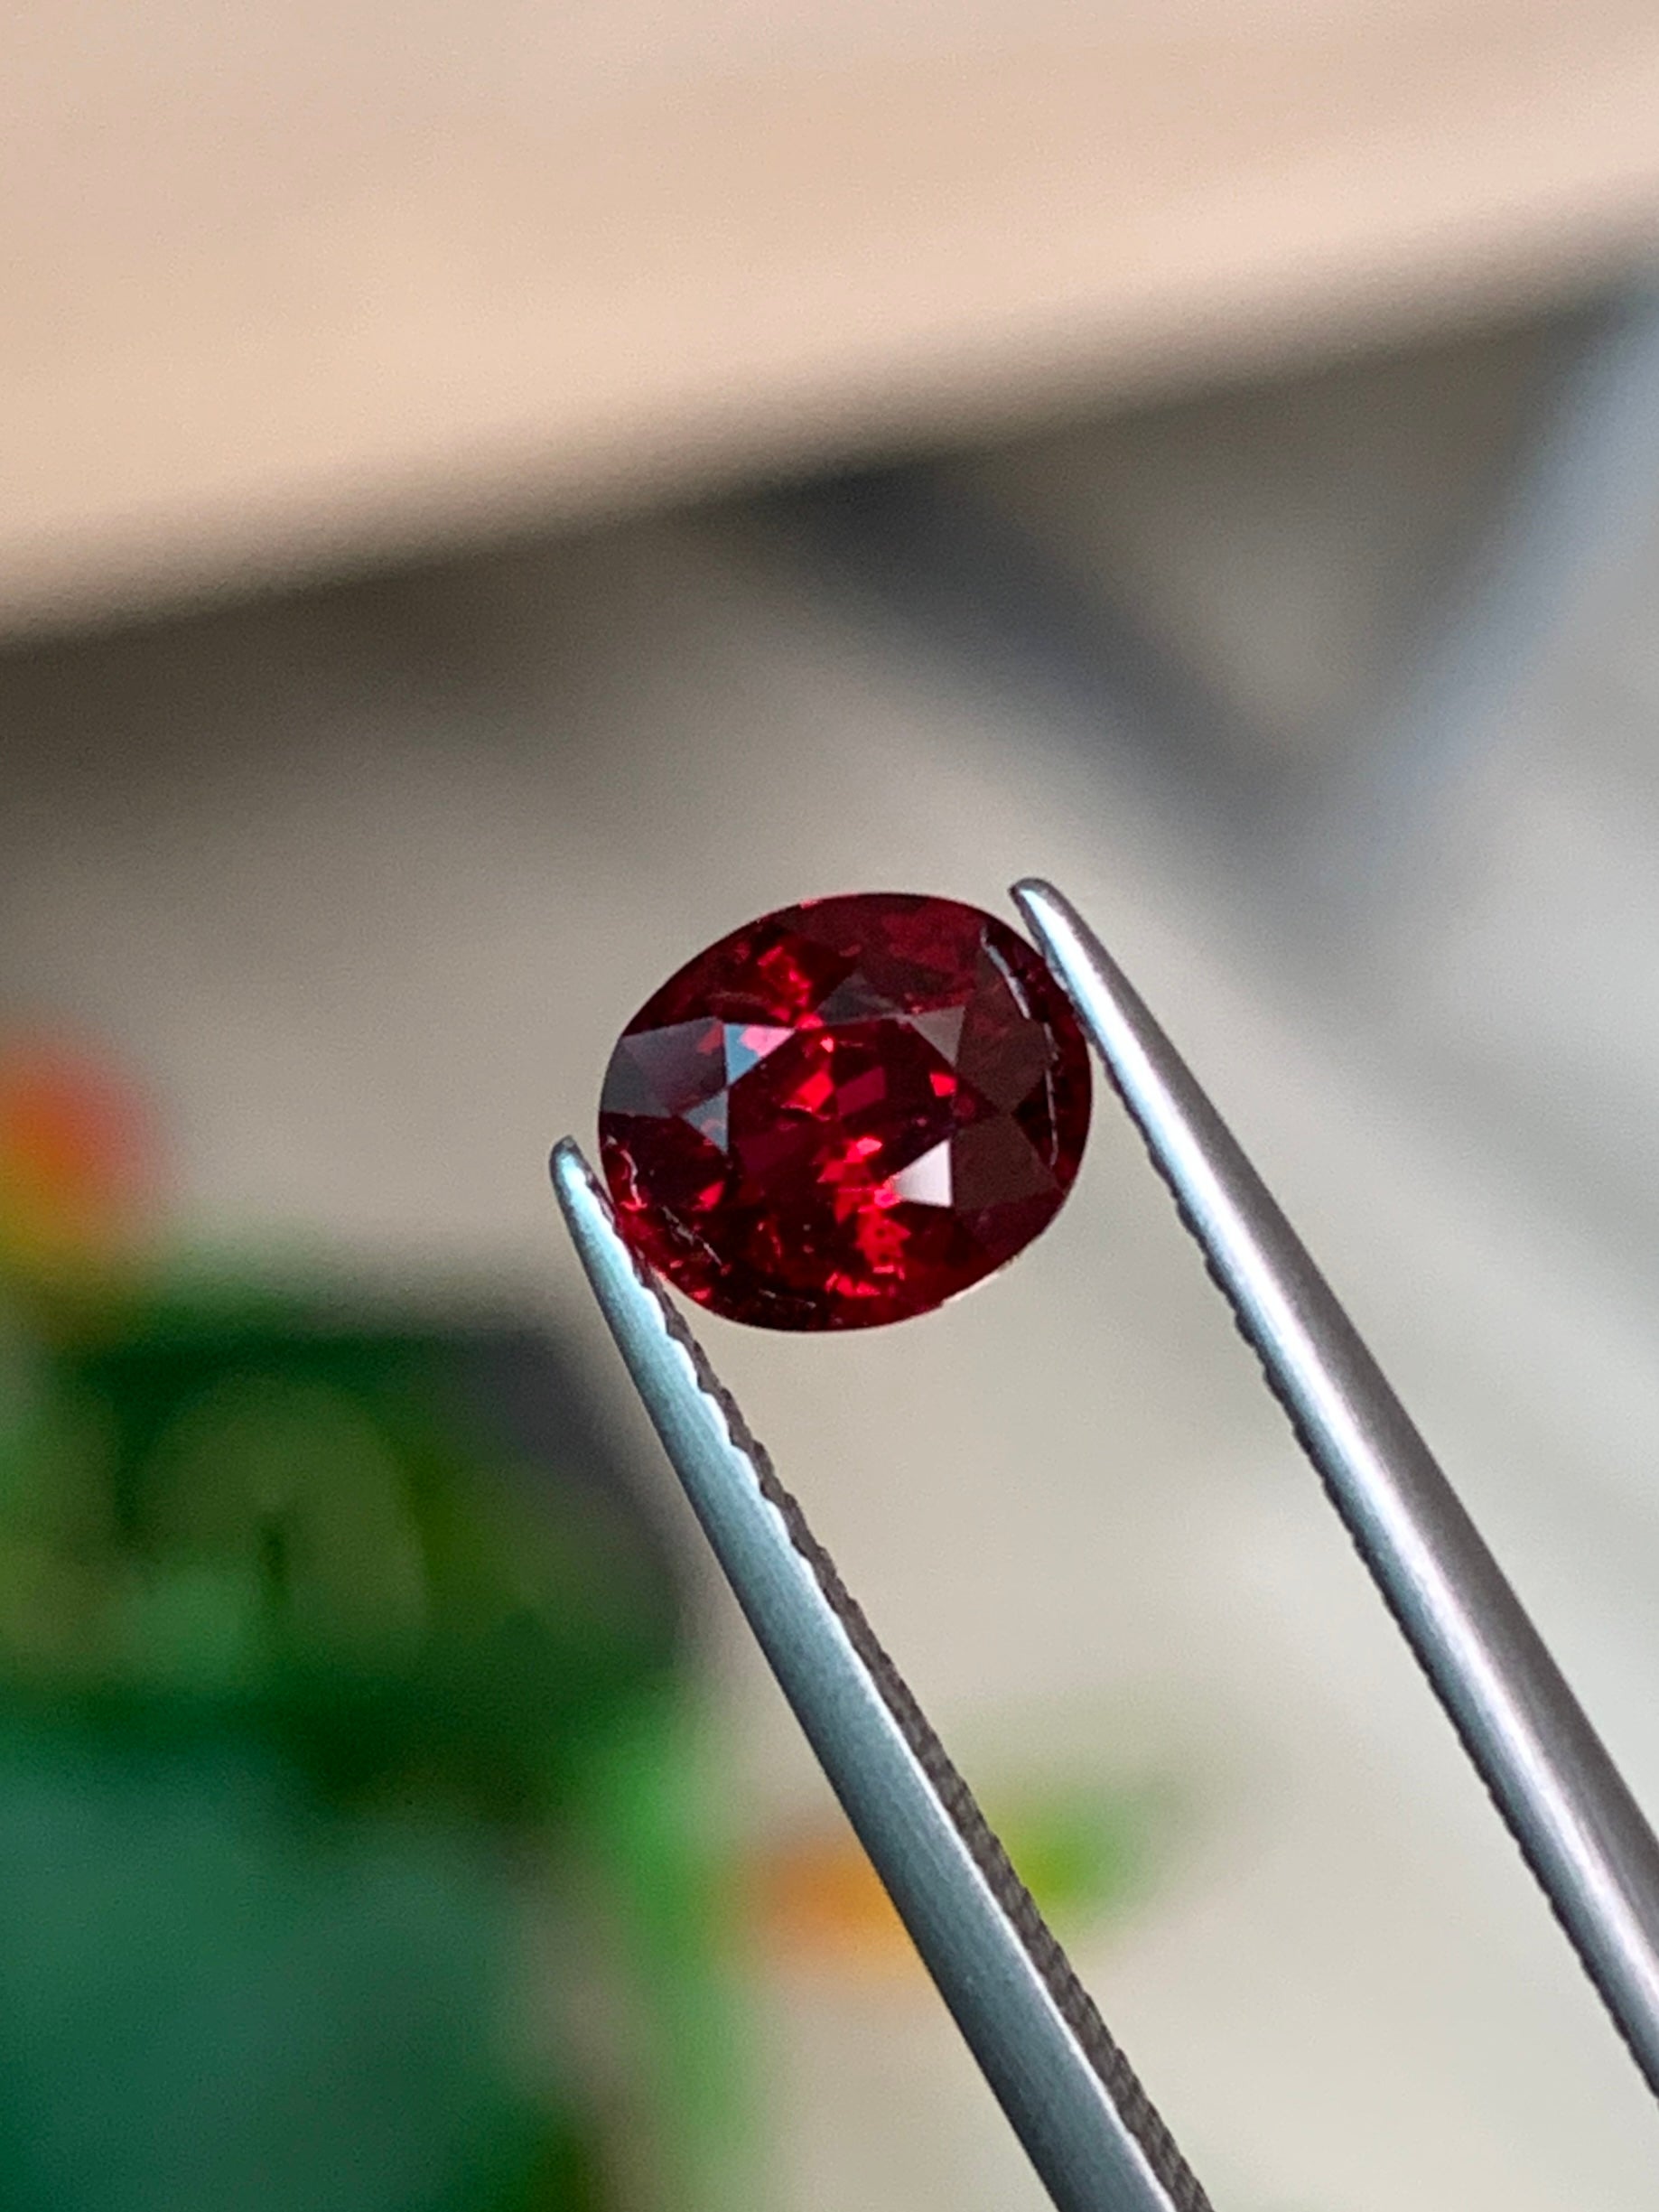 A certified Pigeon Blood Ruby from Mozambique is a rare and highly prized gemstone known for its deep red color reminiscent of pigeon blood. It undergoes rigorous gemological testing to confirm its quality, often meeting criteria for color